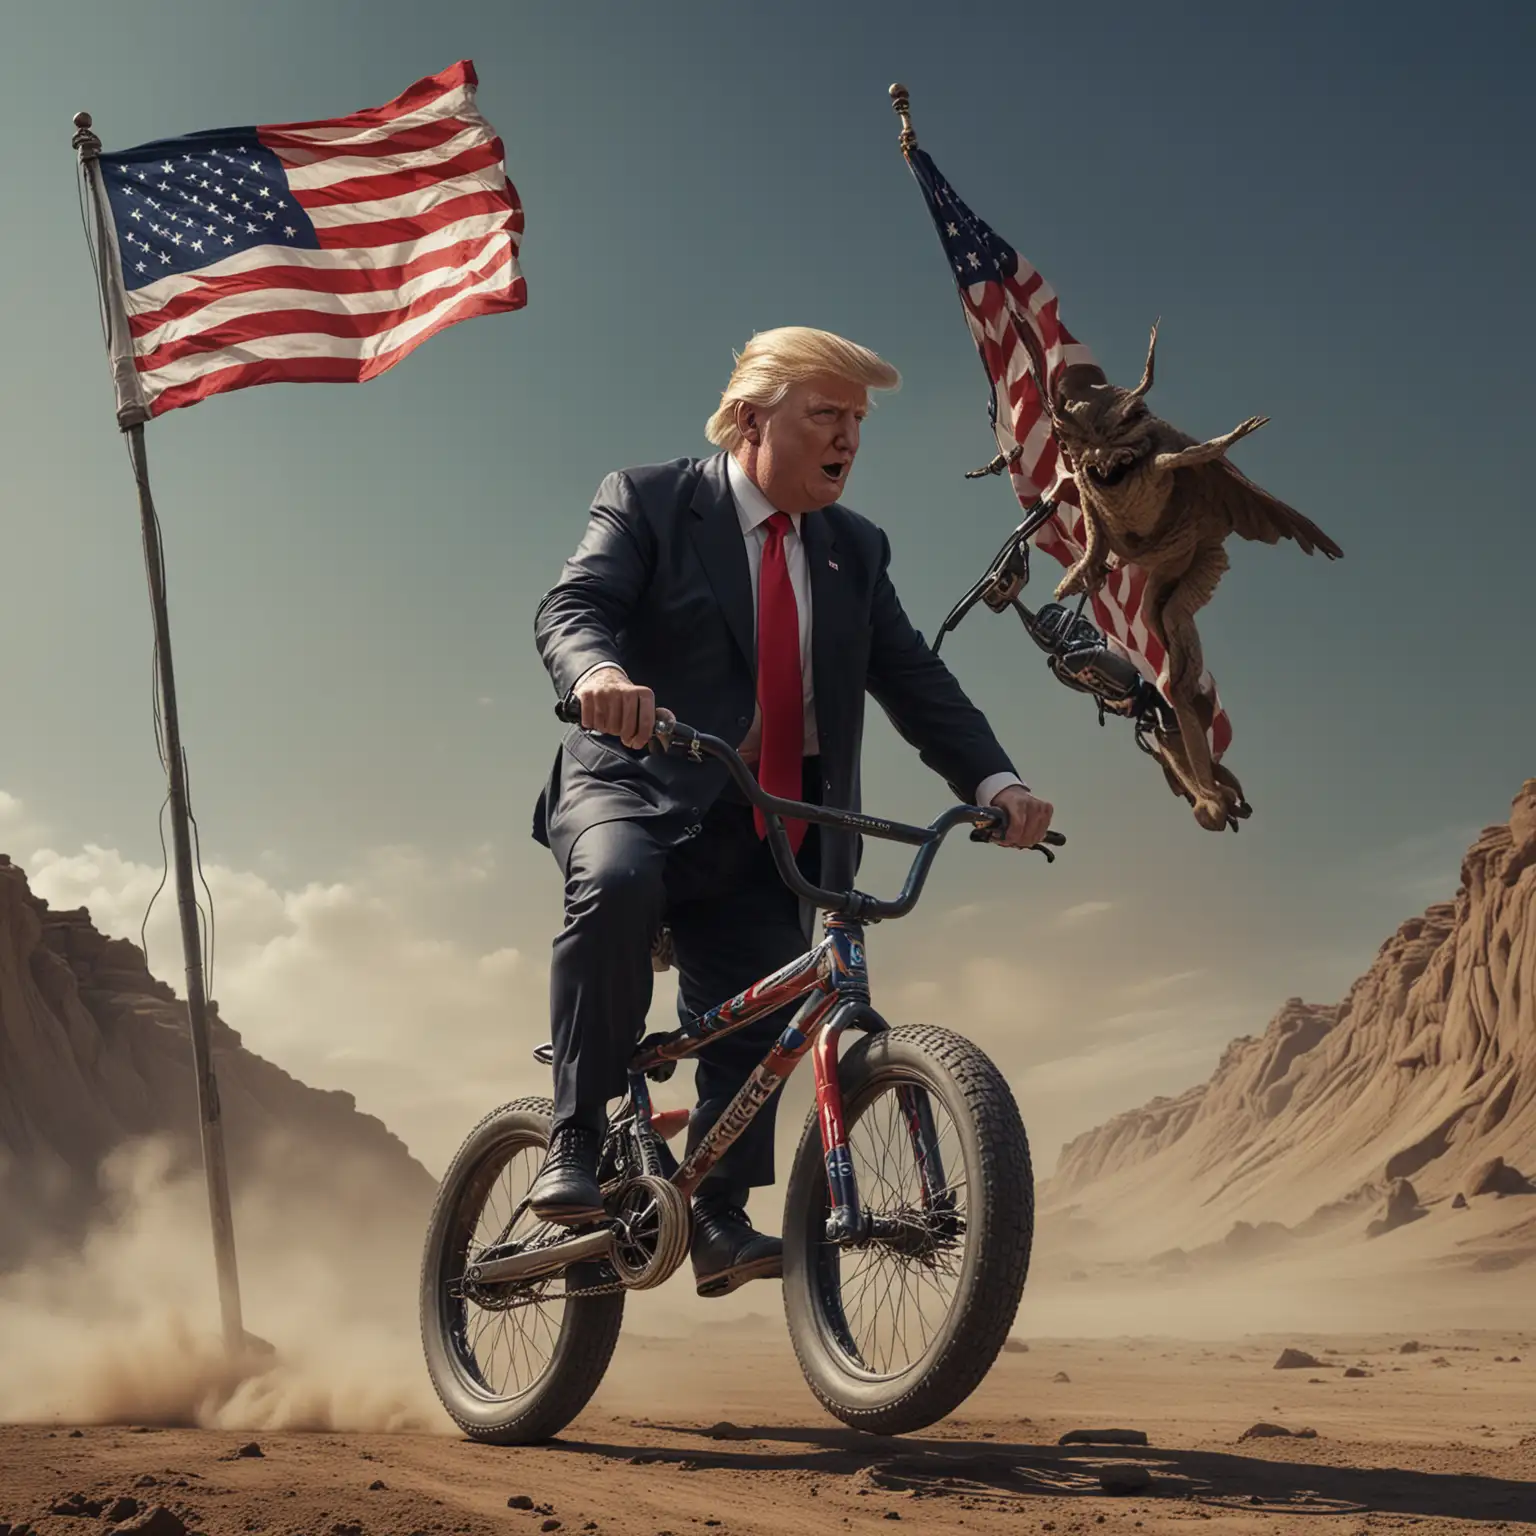 professional photo, high detail, 4k, Giant Trump rides a BMX on the small planet Earth, he holds an American flag in his hand